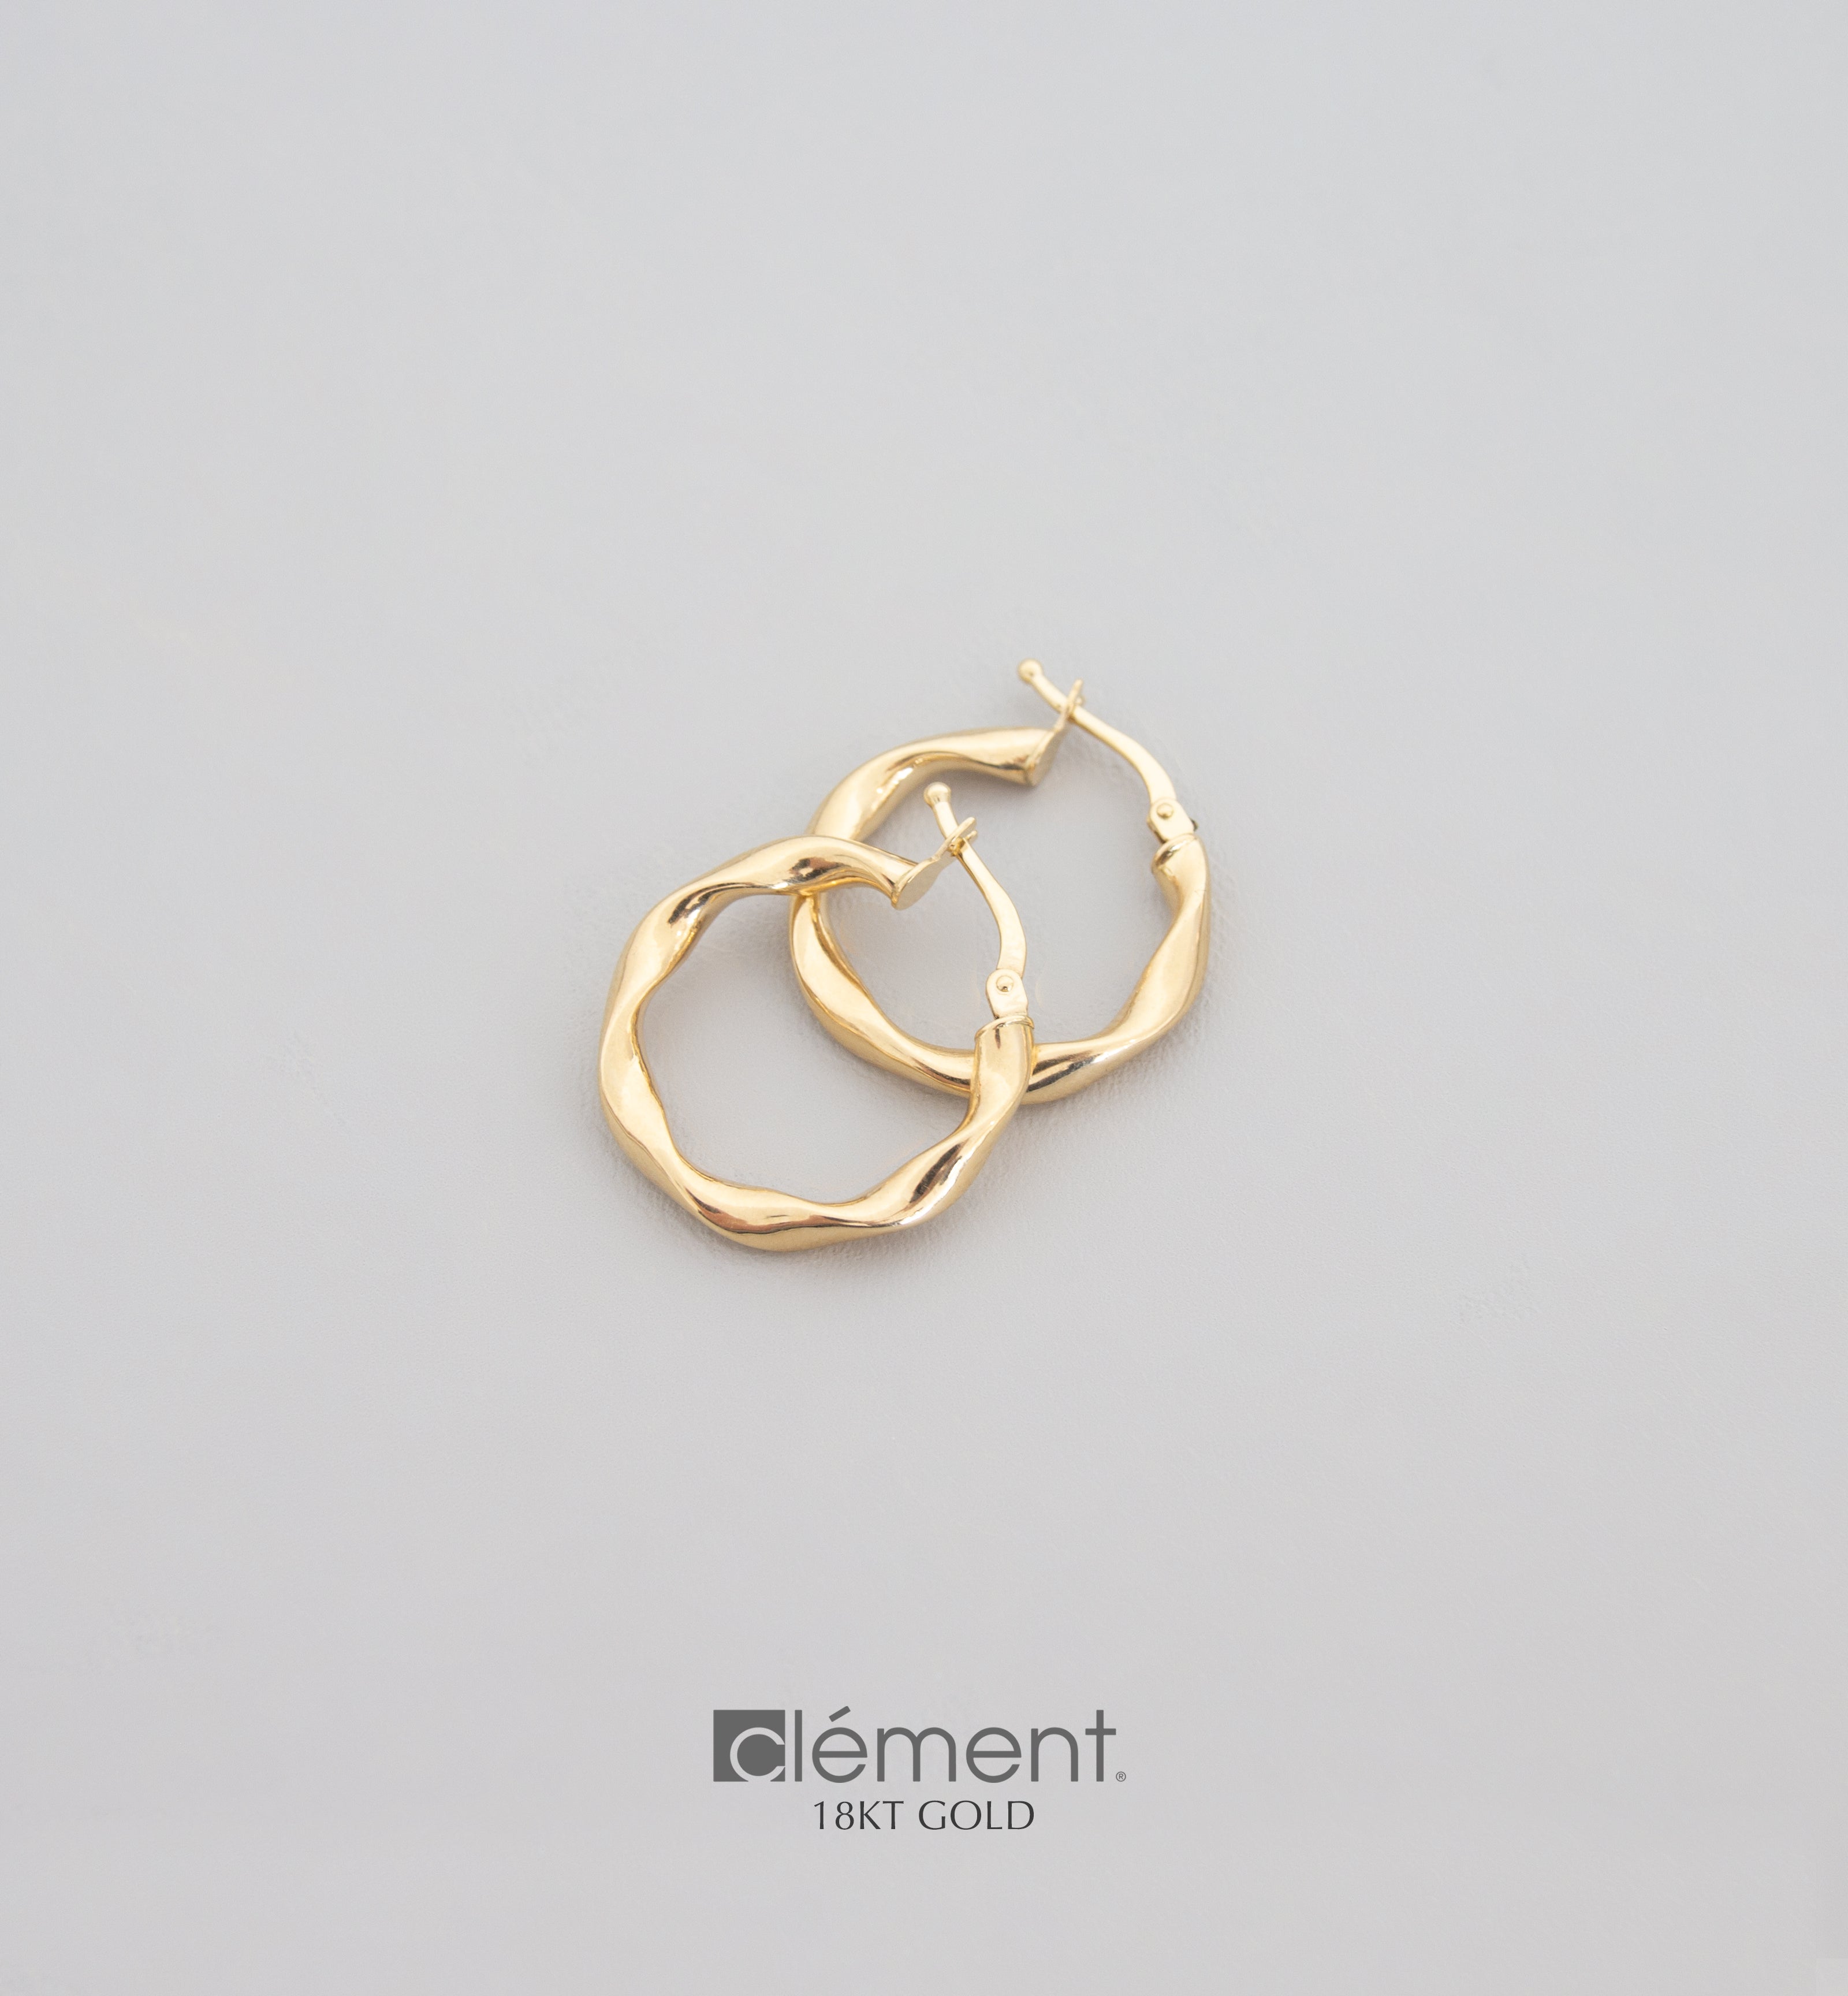 18ct Yellow Gold Twisted Hoop Earrings